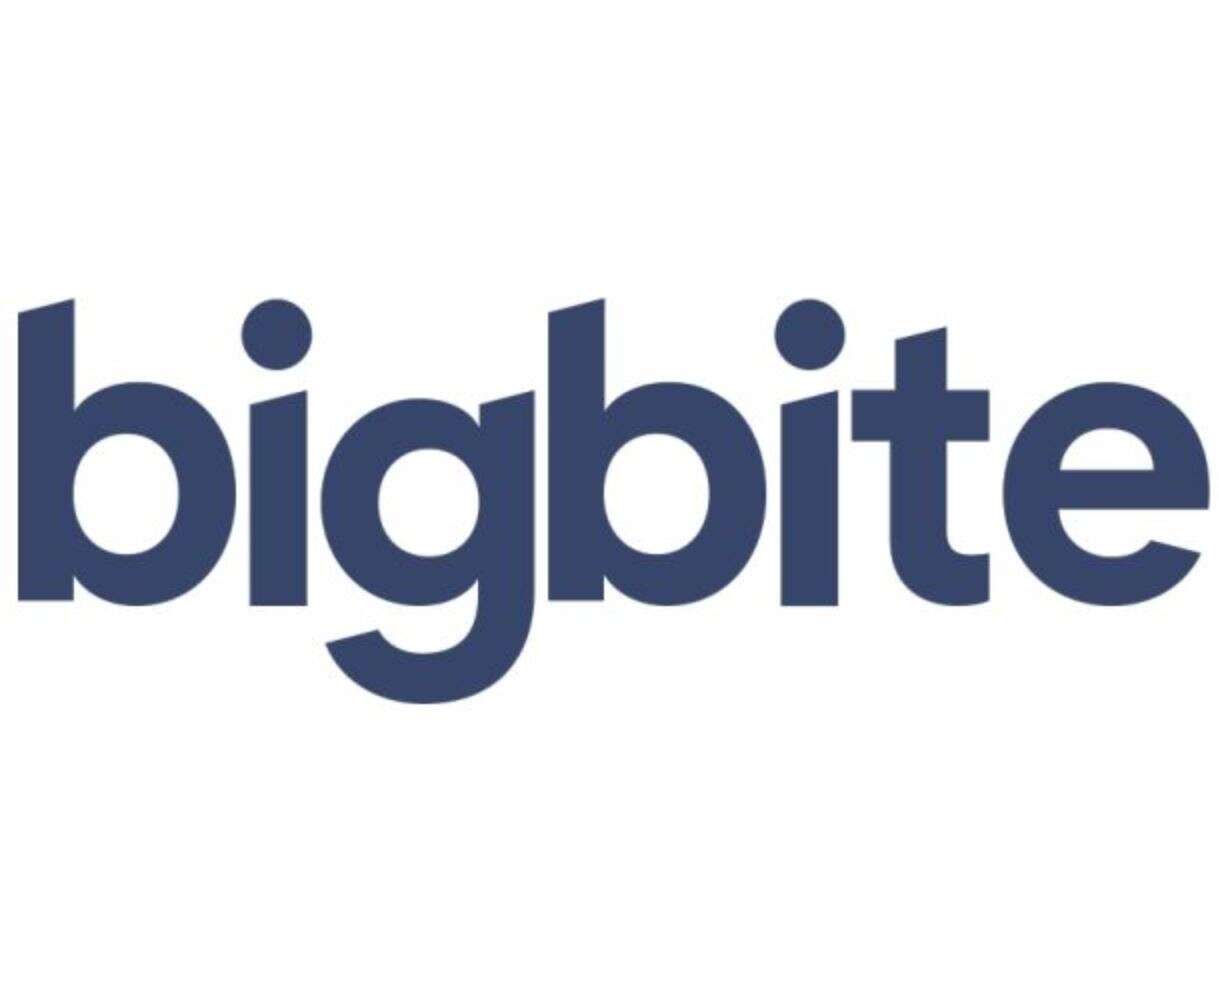 Big Bite: Revolutionising how global newsrooms create, collaborate and publish